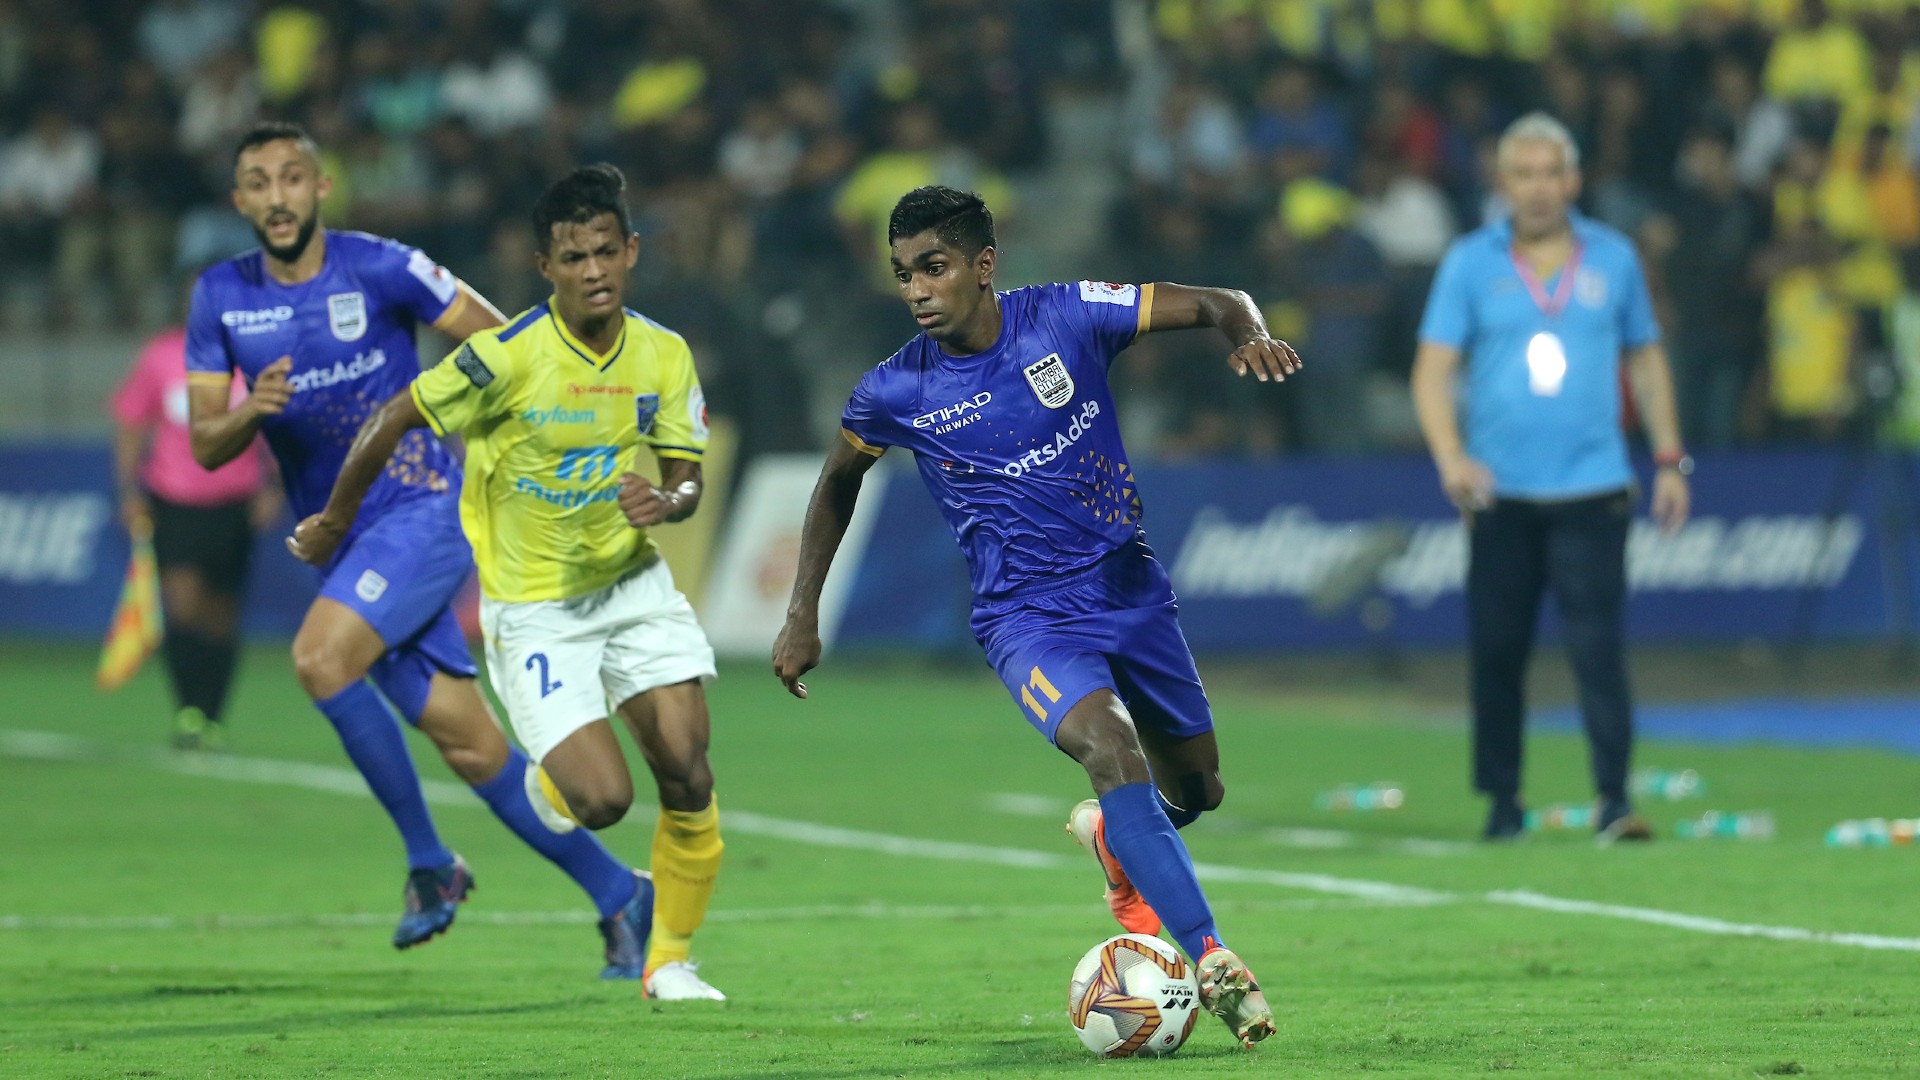 ISL Transfers 2022/23: Odisha FC announce the signing of Raynier Fernandes from Mumbai City FC on a season-long loan - Check out